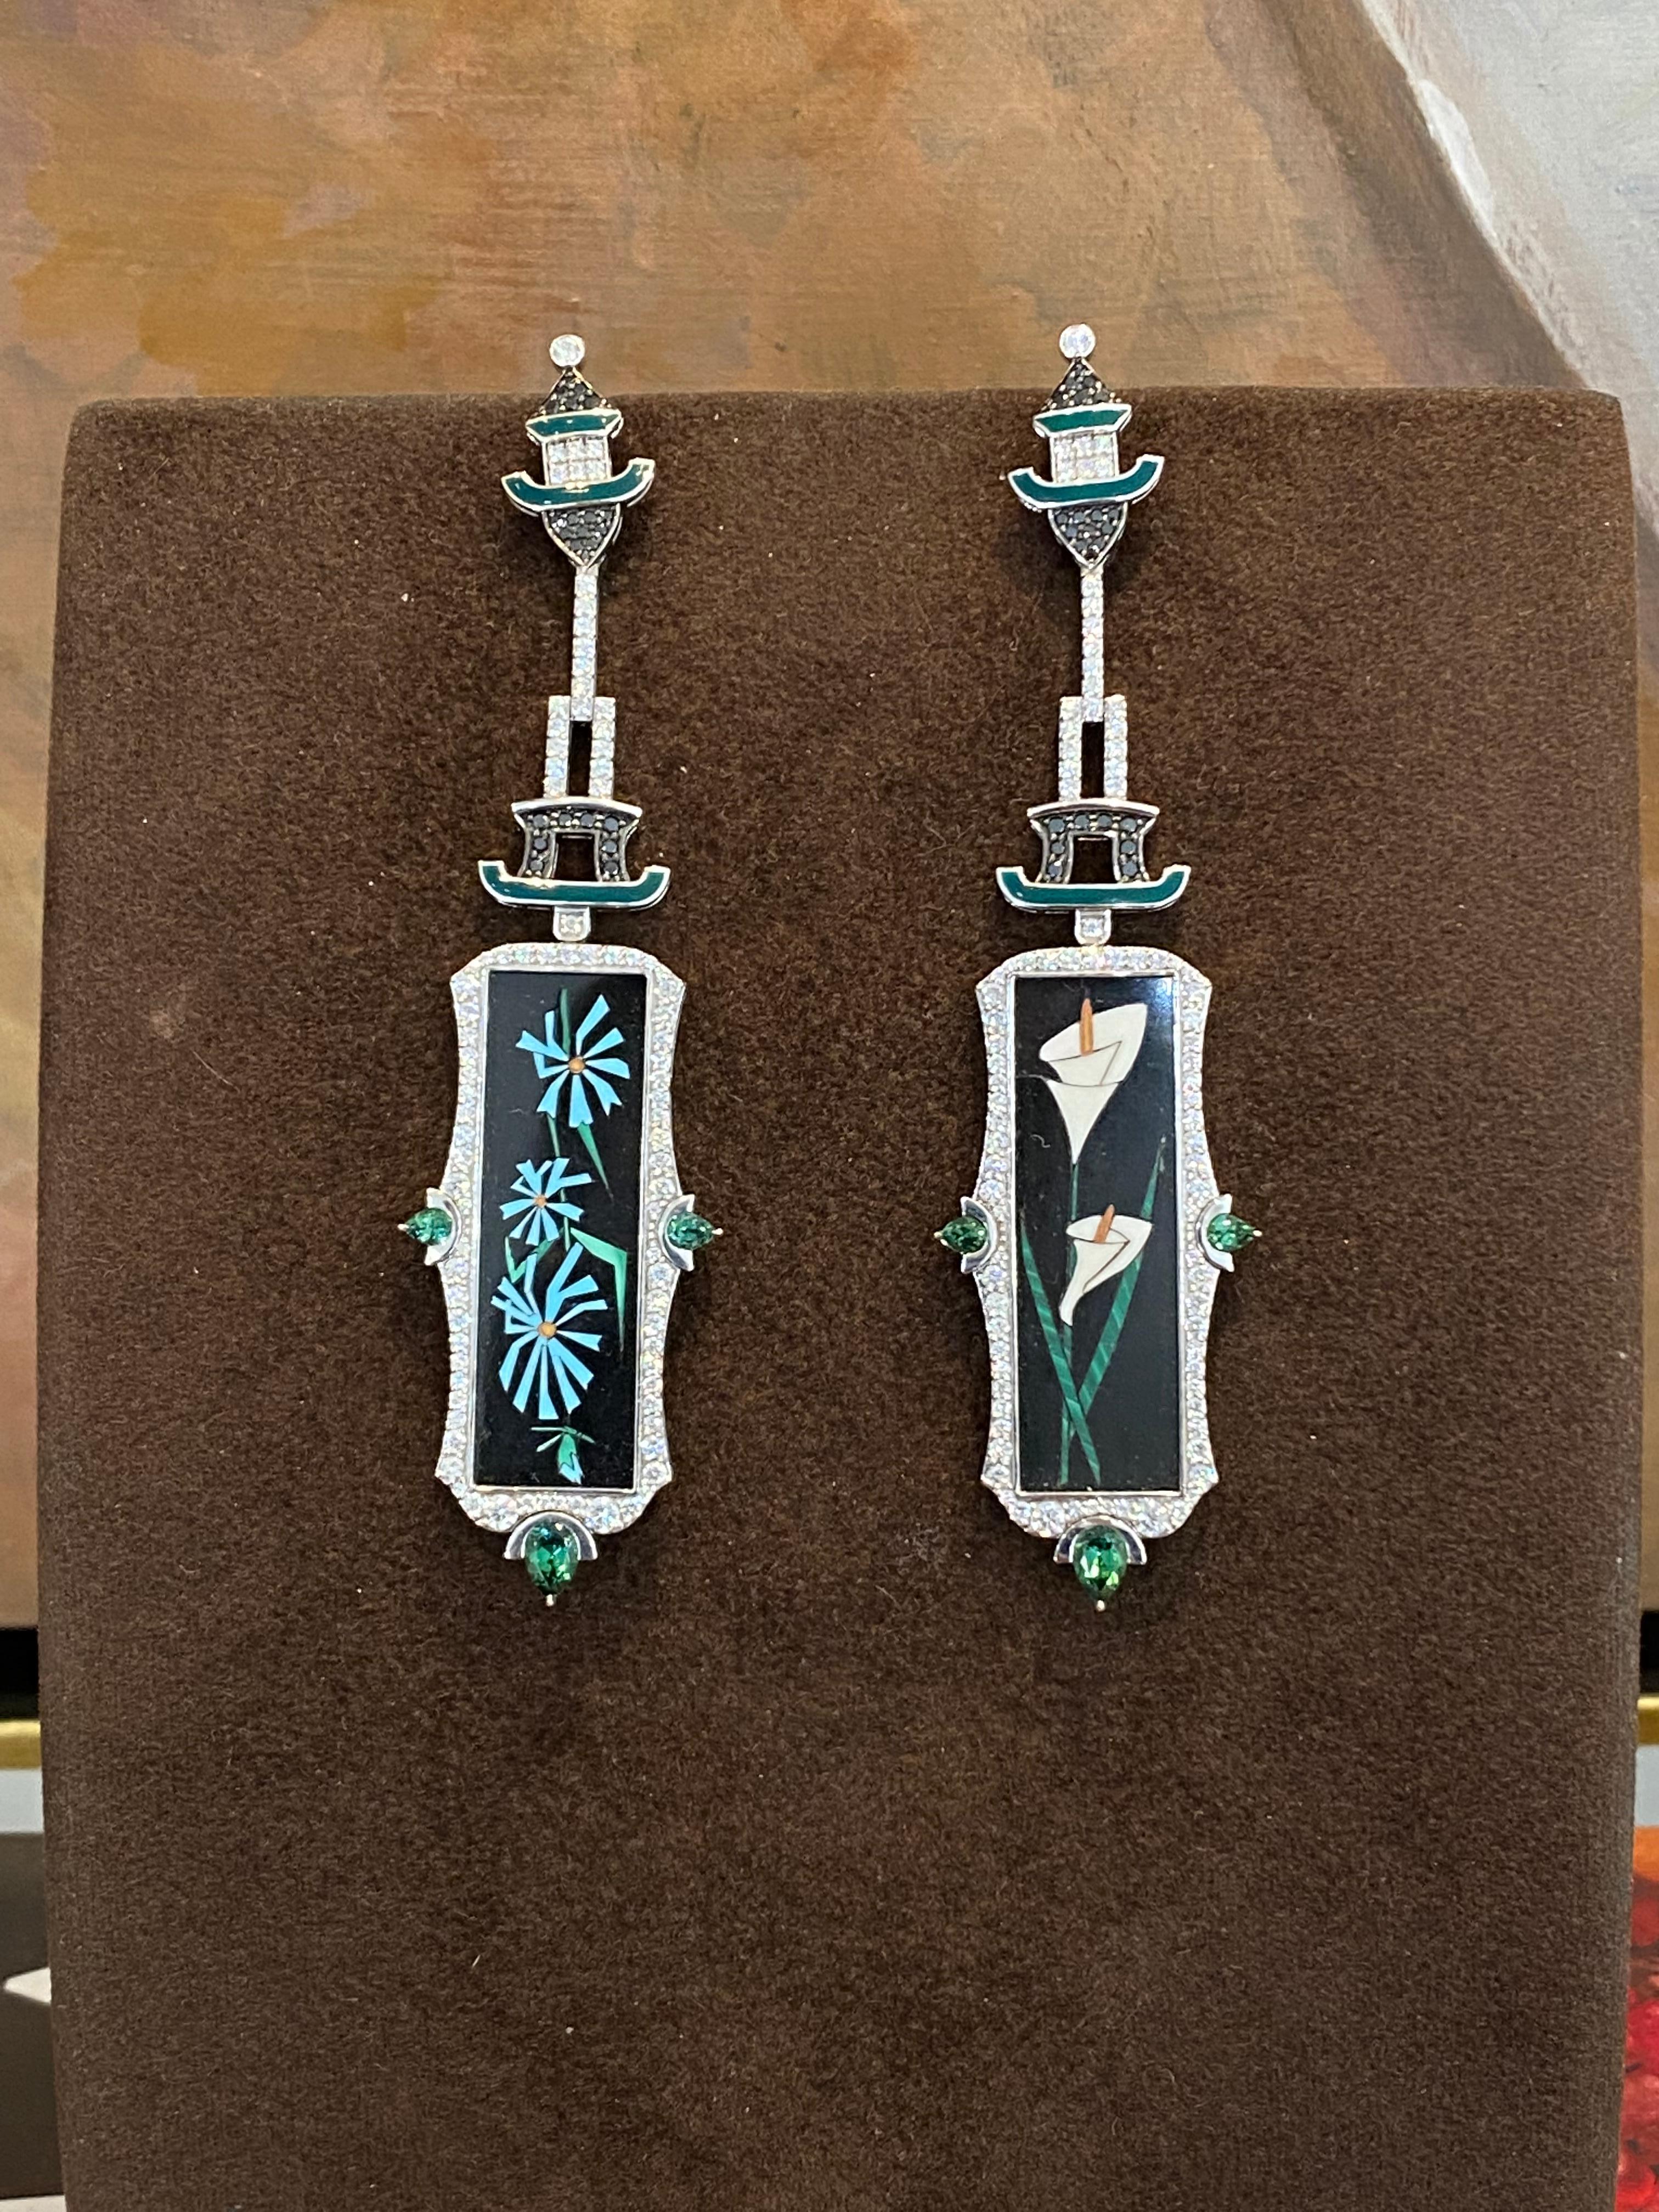 Bochic Exquisite and bold Mosaic Bird earrings shimmer with 18k Gold, White and Black Diamonds.
The Mosaic flower center piece is a work of art made from gem stones like, black onyx, agate, jade turquoise and more. 

48 Diamonds 0.50 Carat 
178